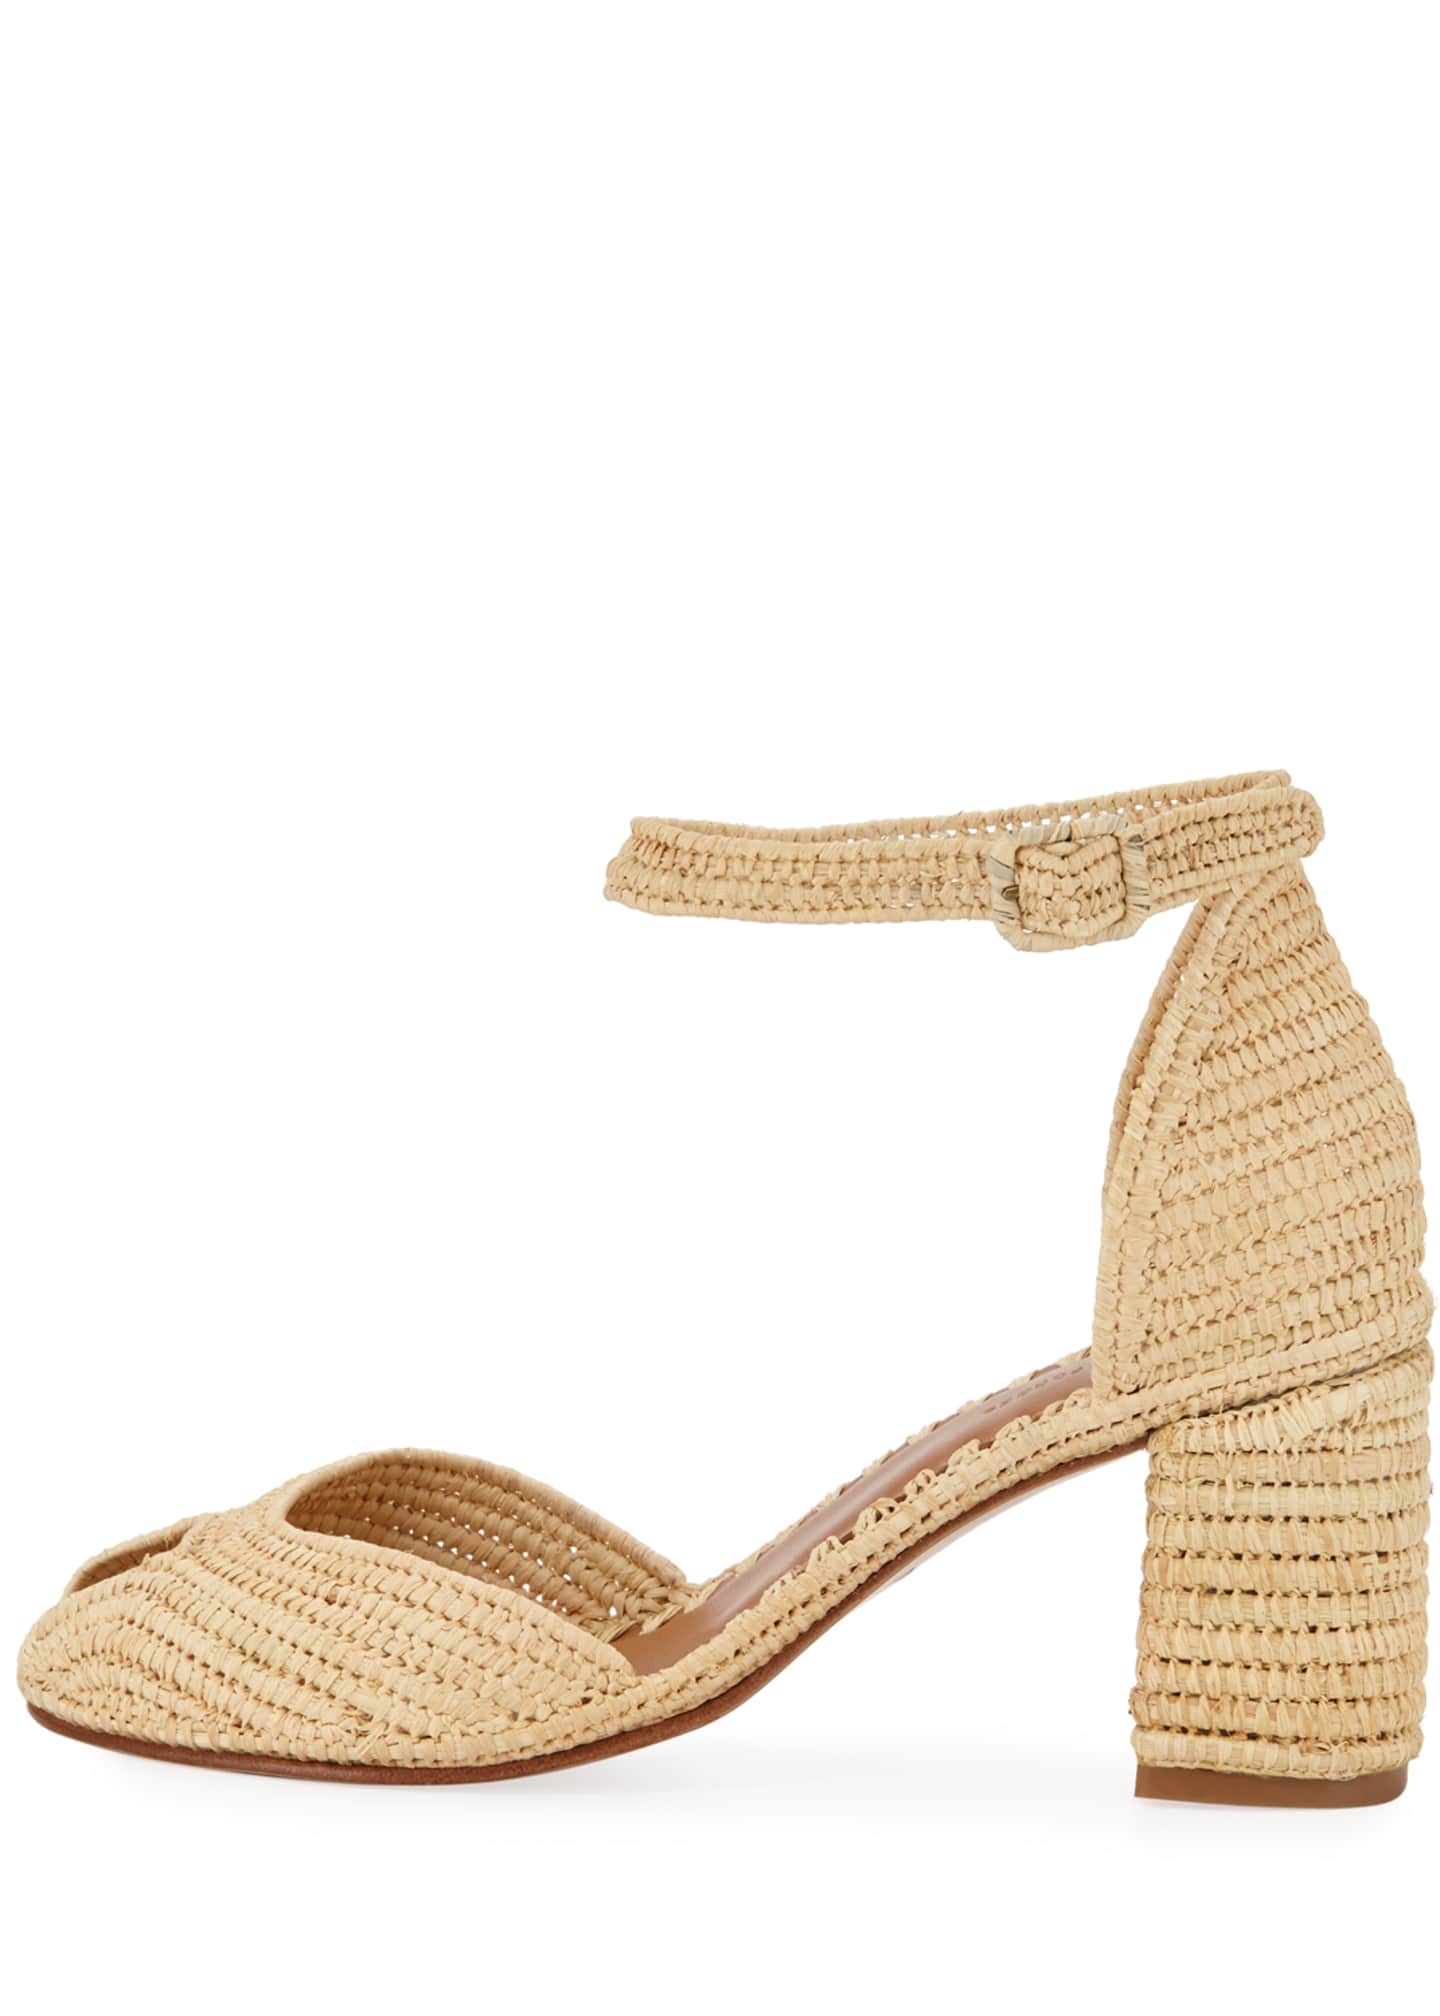 Carrie Forbes Laila Raffia Ankle Sandals - Bergdorf Goodman